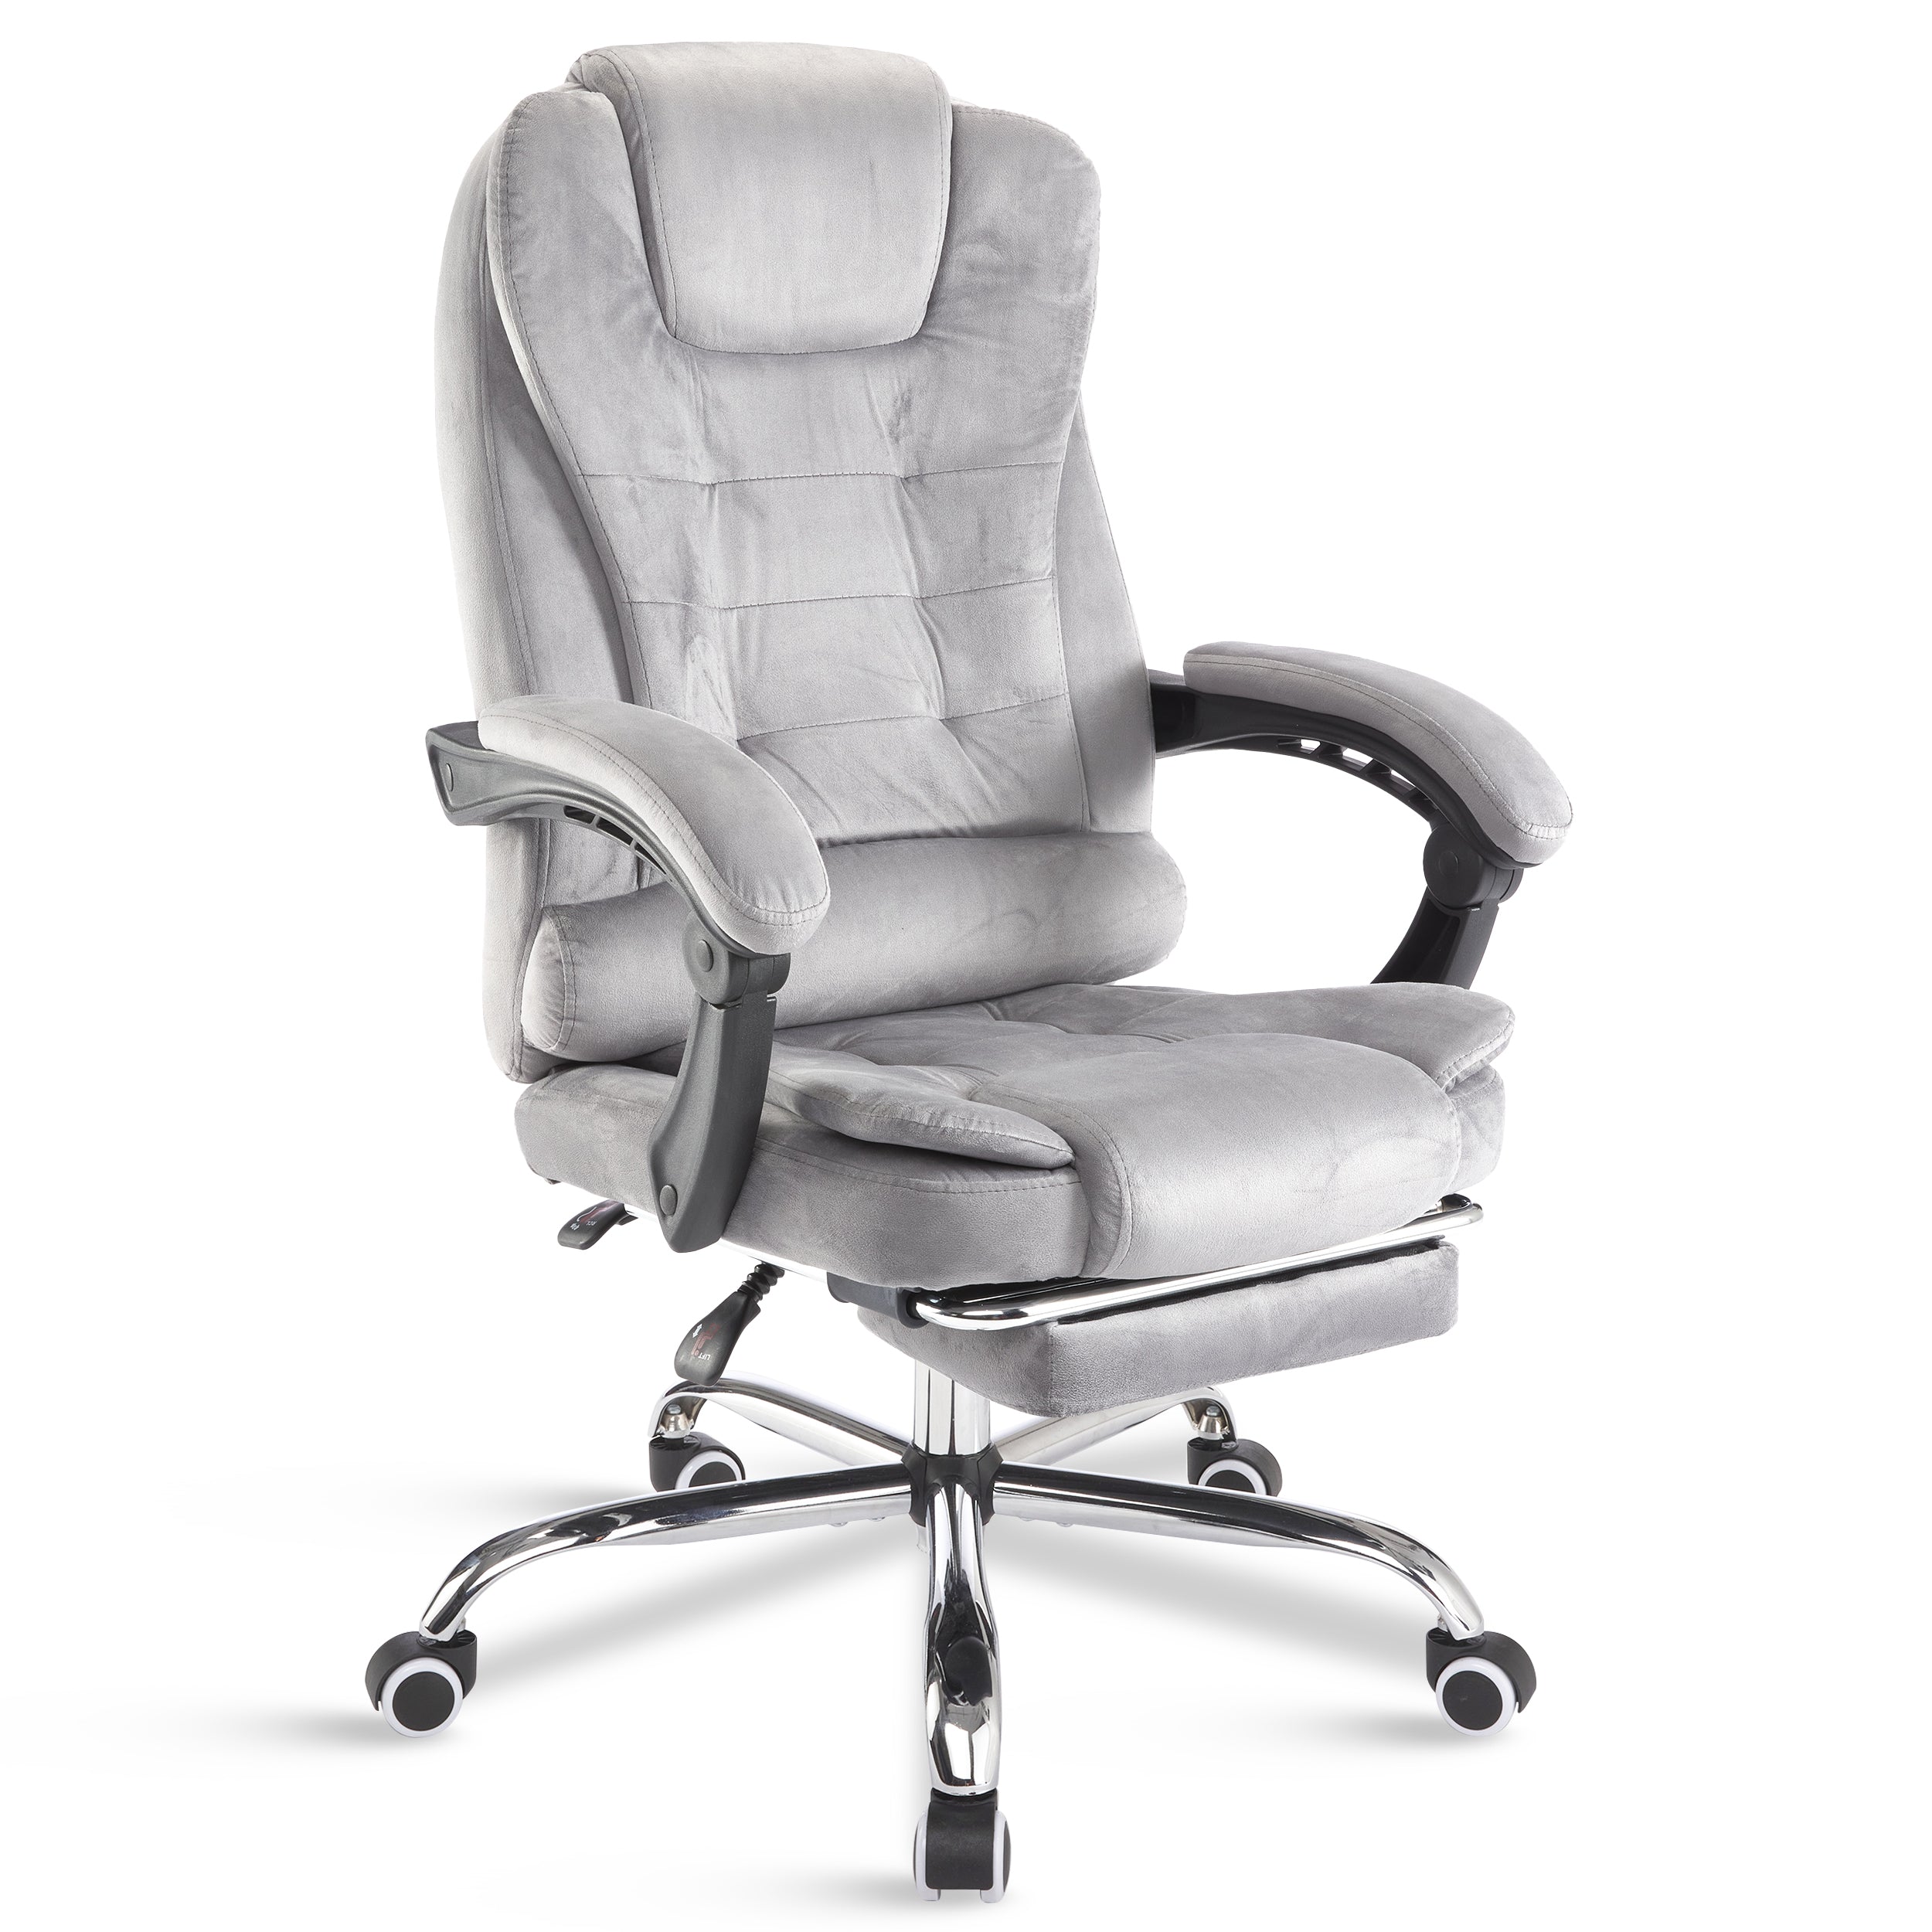 Blisswood Premium Office Recliner Chair: Comfort and Reliability Combined